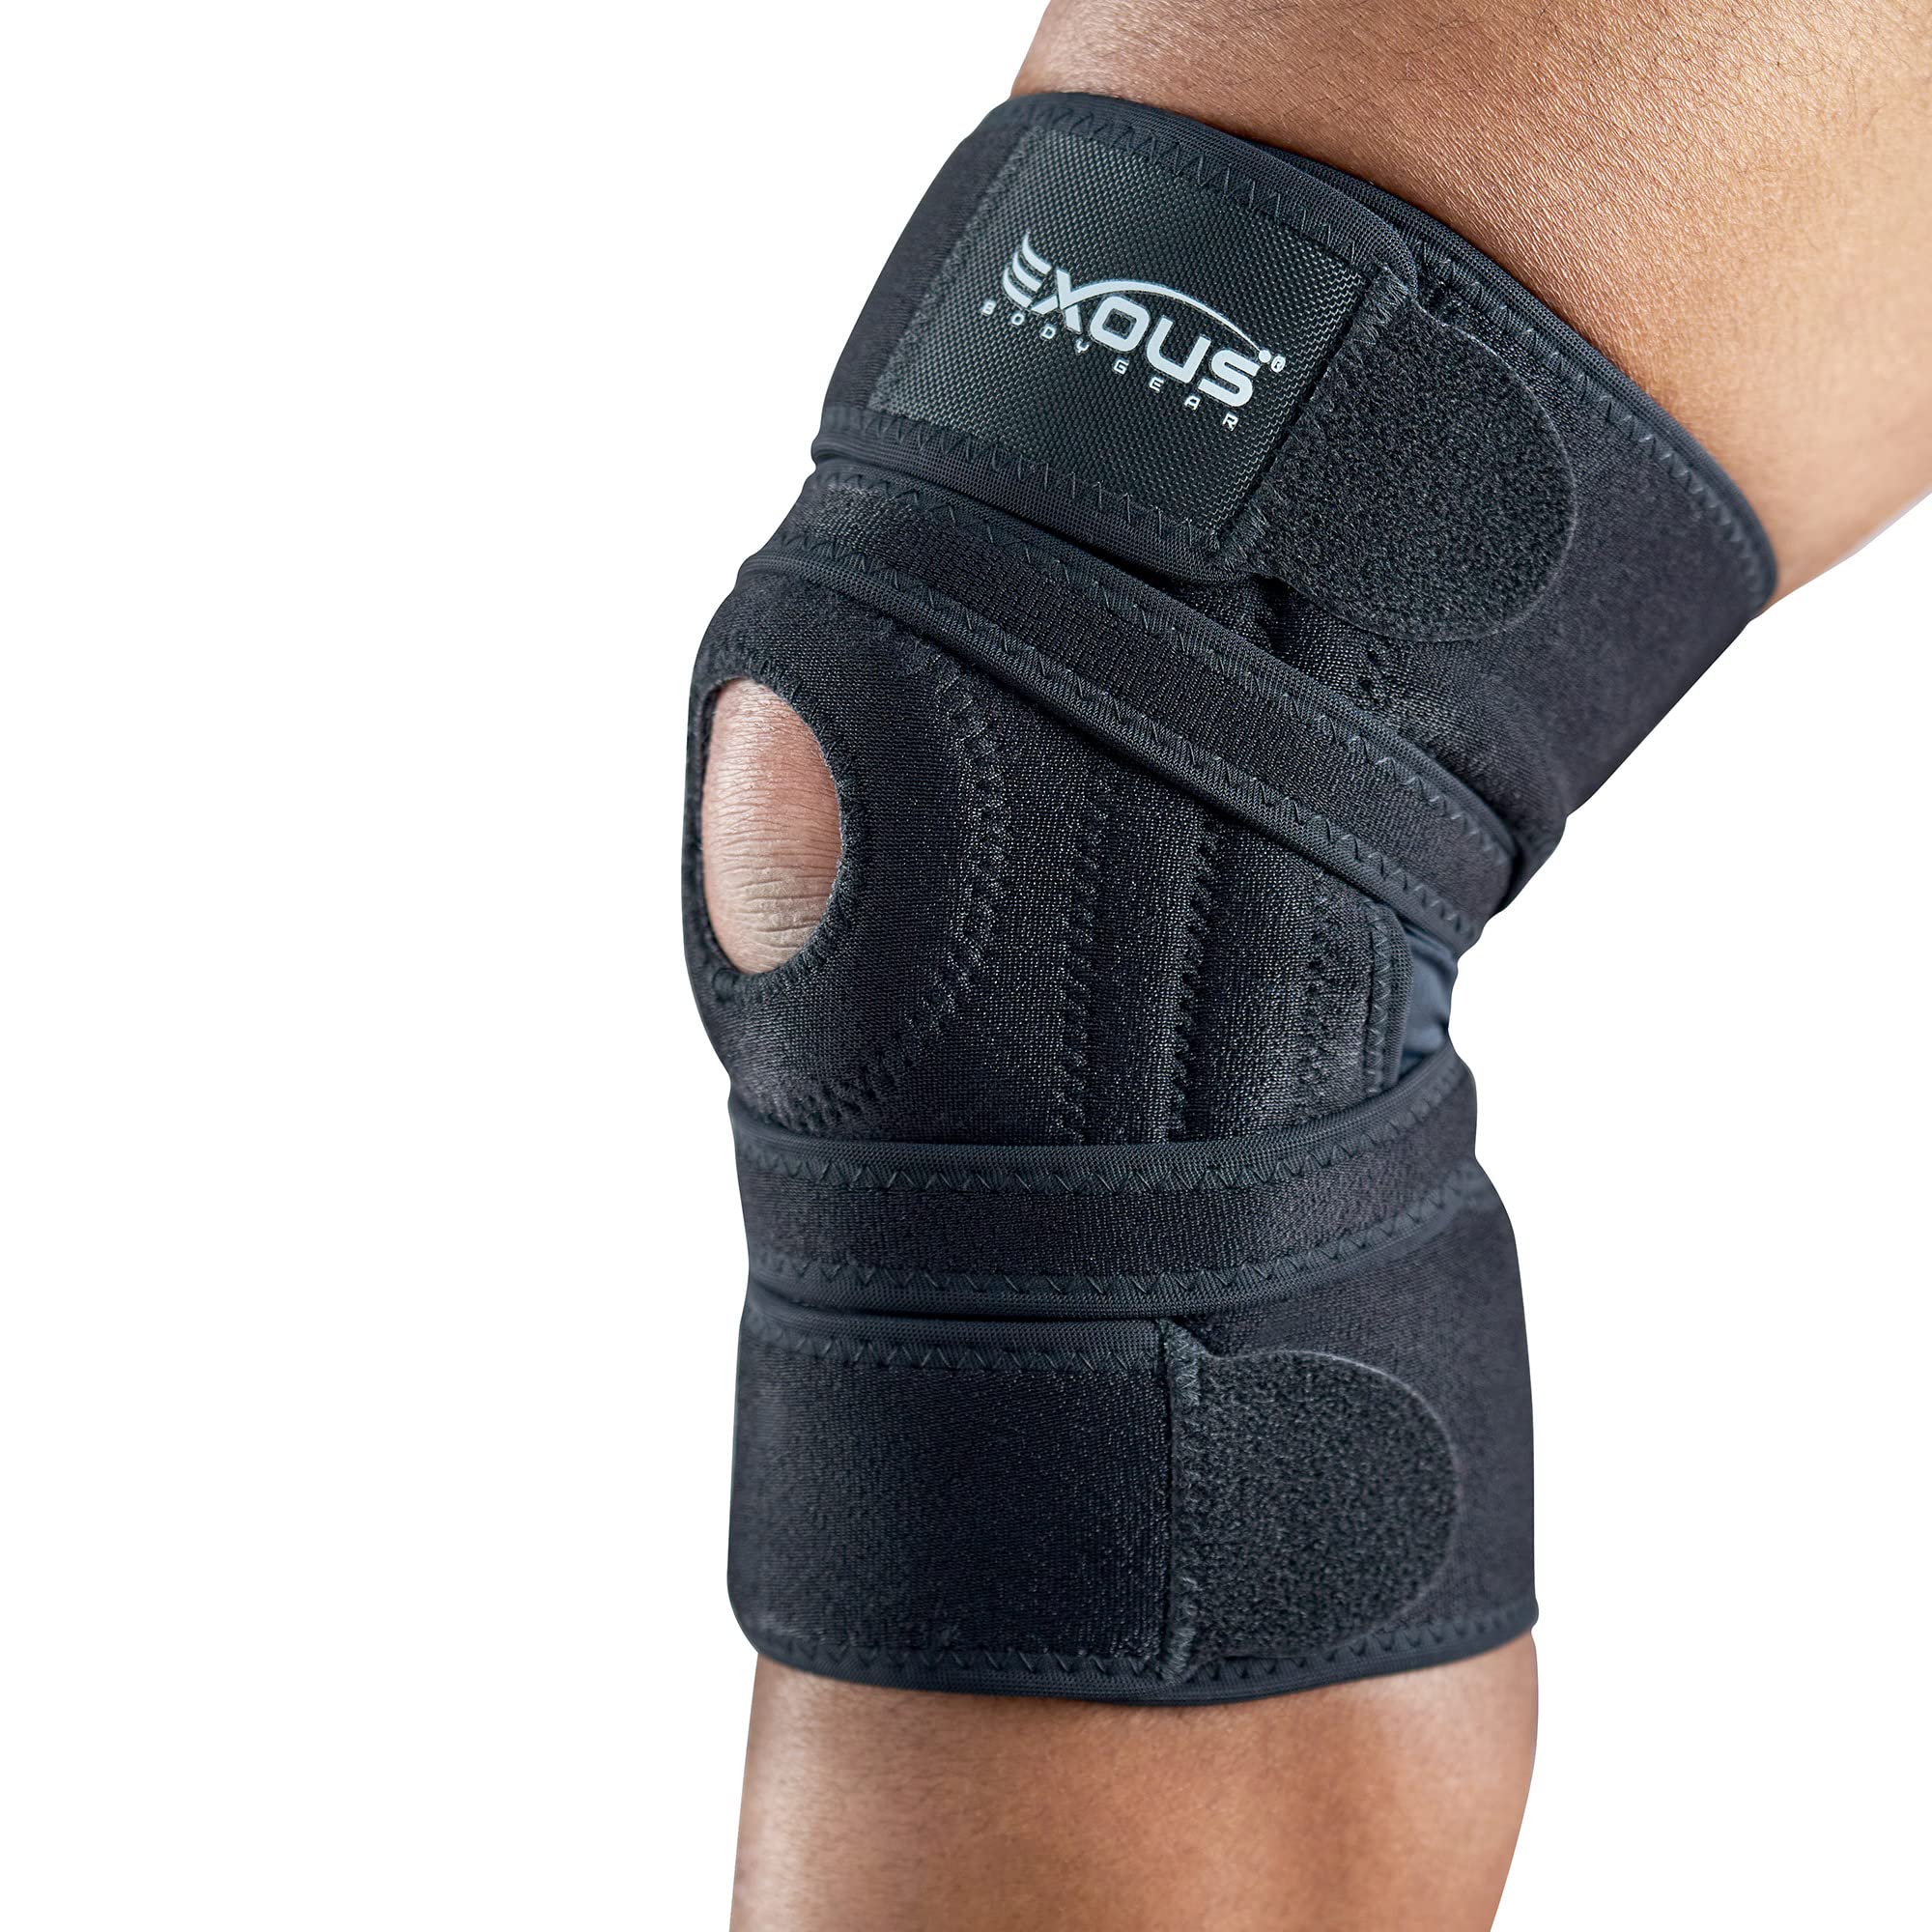 The Best Knee Brace for a Meniscus Tear - Icarus Medical